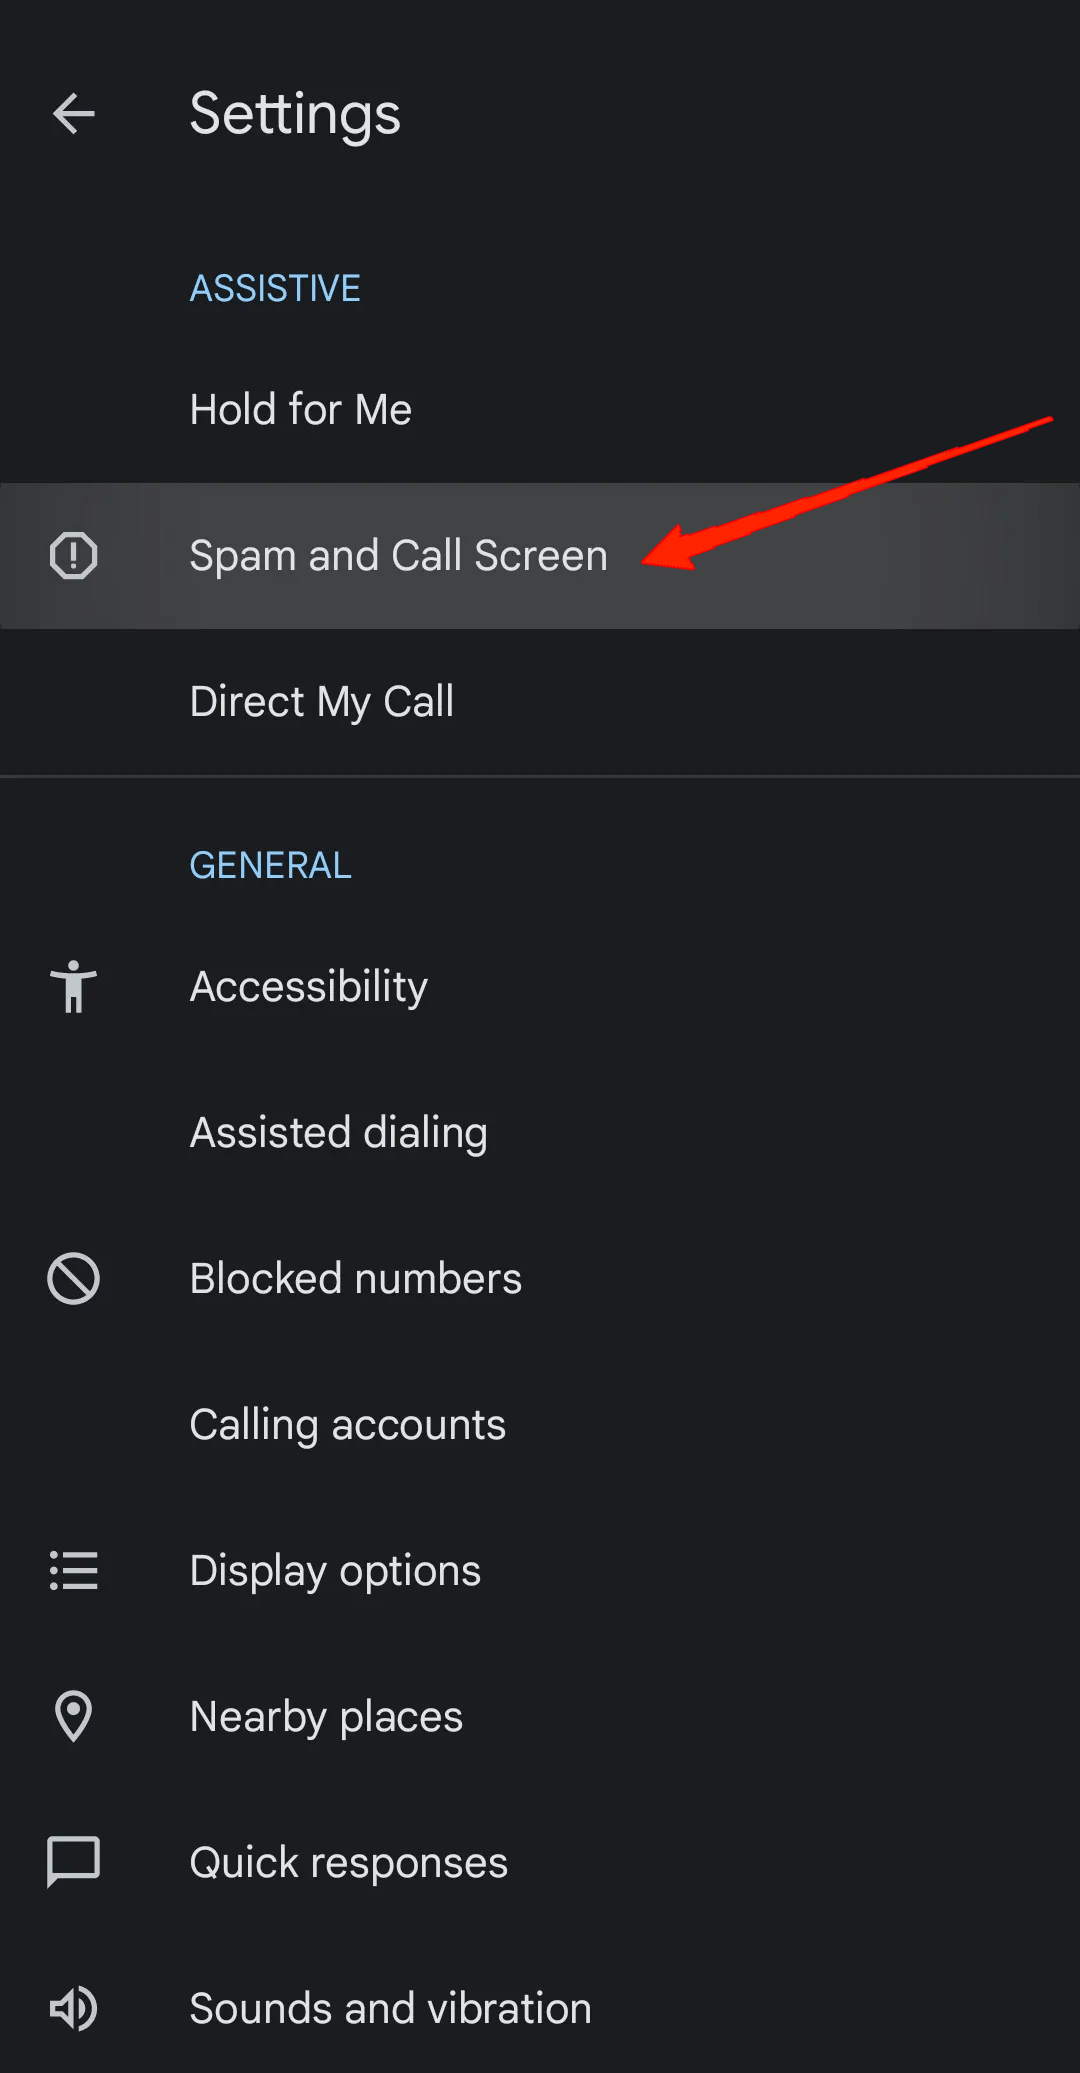 go to Spam and Call Screen and again tap on Call Screen